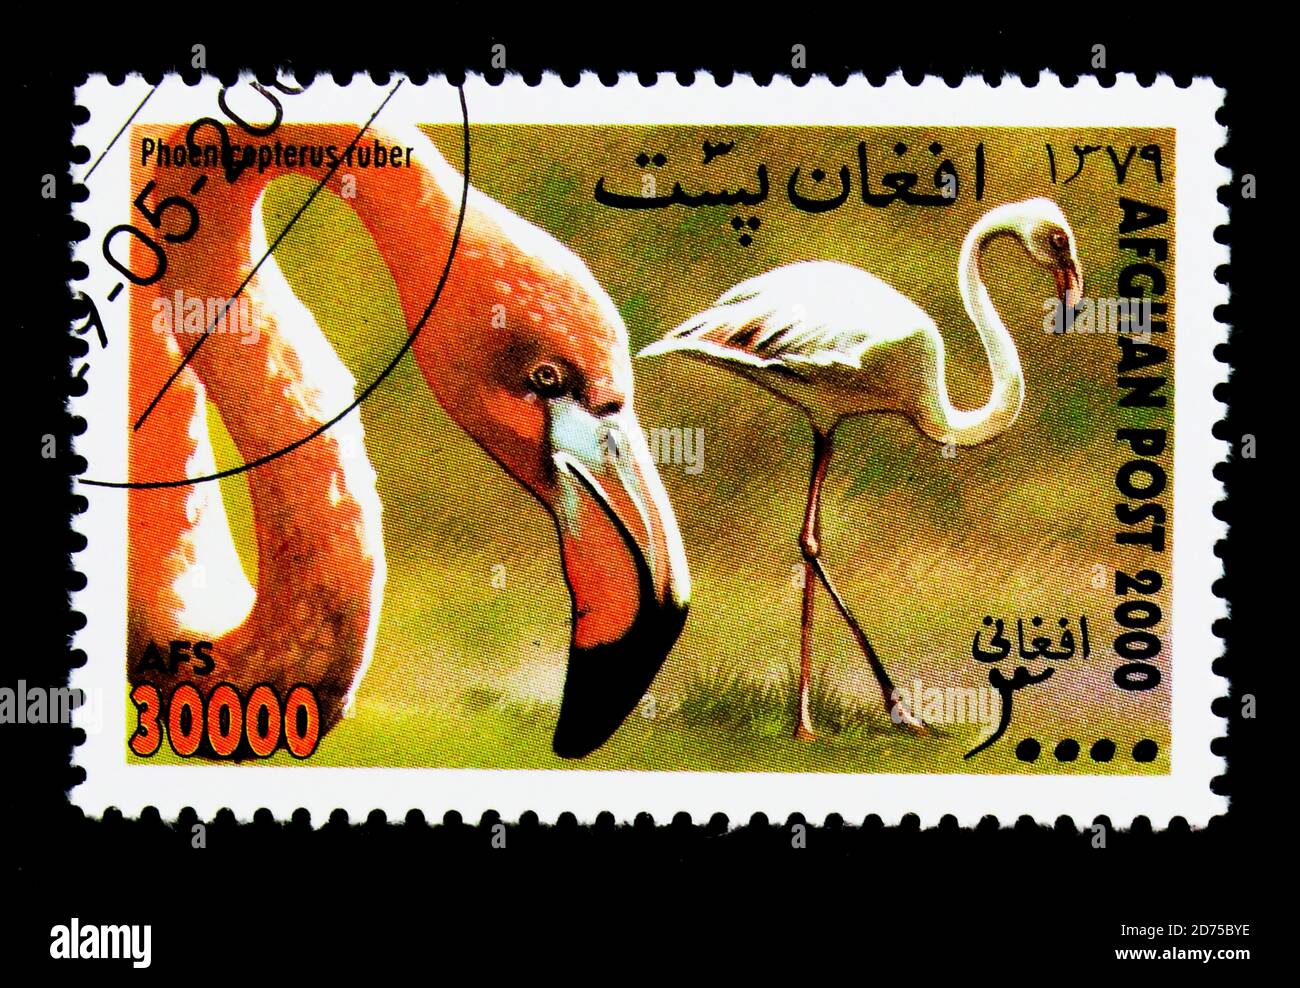 MOSCOW, RUSSIA - NOVEMBER 25, 2017: A stamp printed in Afghanistan shows Caribbean Flamingo (Phoenicopterus ruber), International Stamp Exhibition WIP Stock Photo